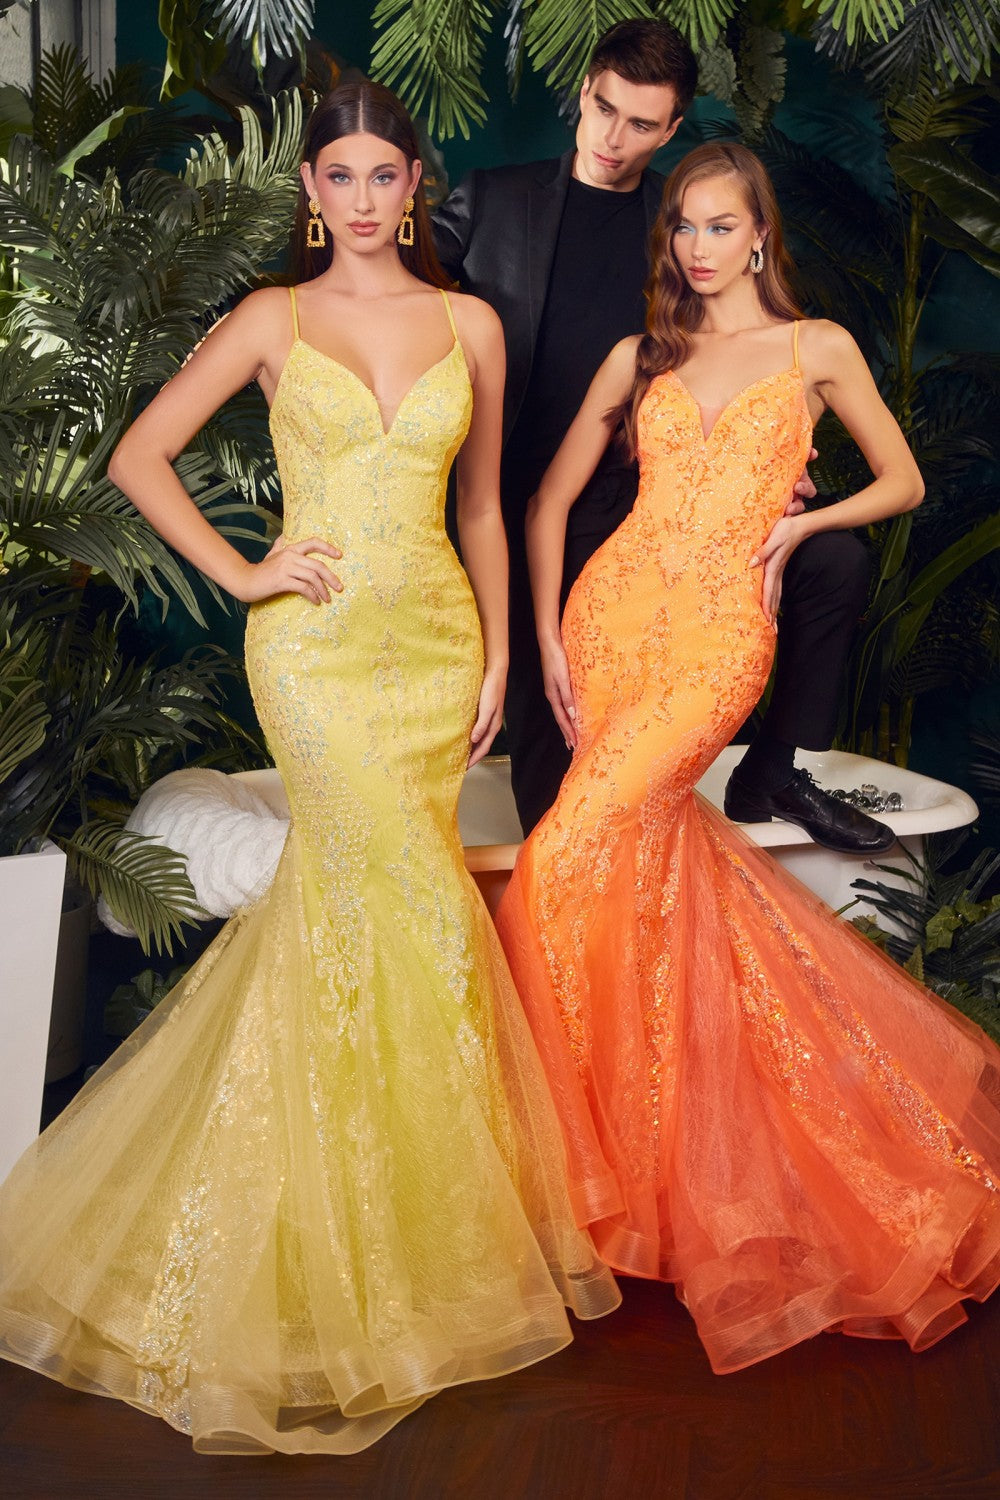 Yellow-Orange Glitter Printed Mermaid Gown CC2279 - Women Evening Formal Gown - Special Occasion